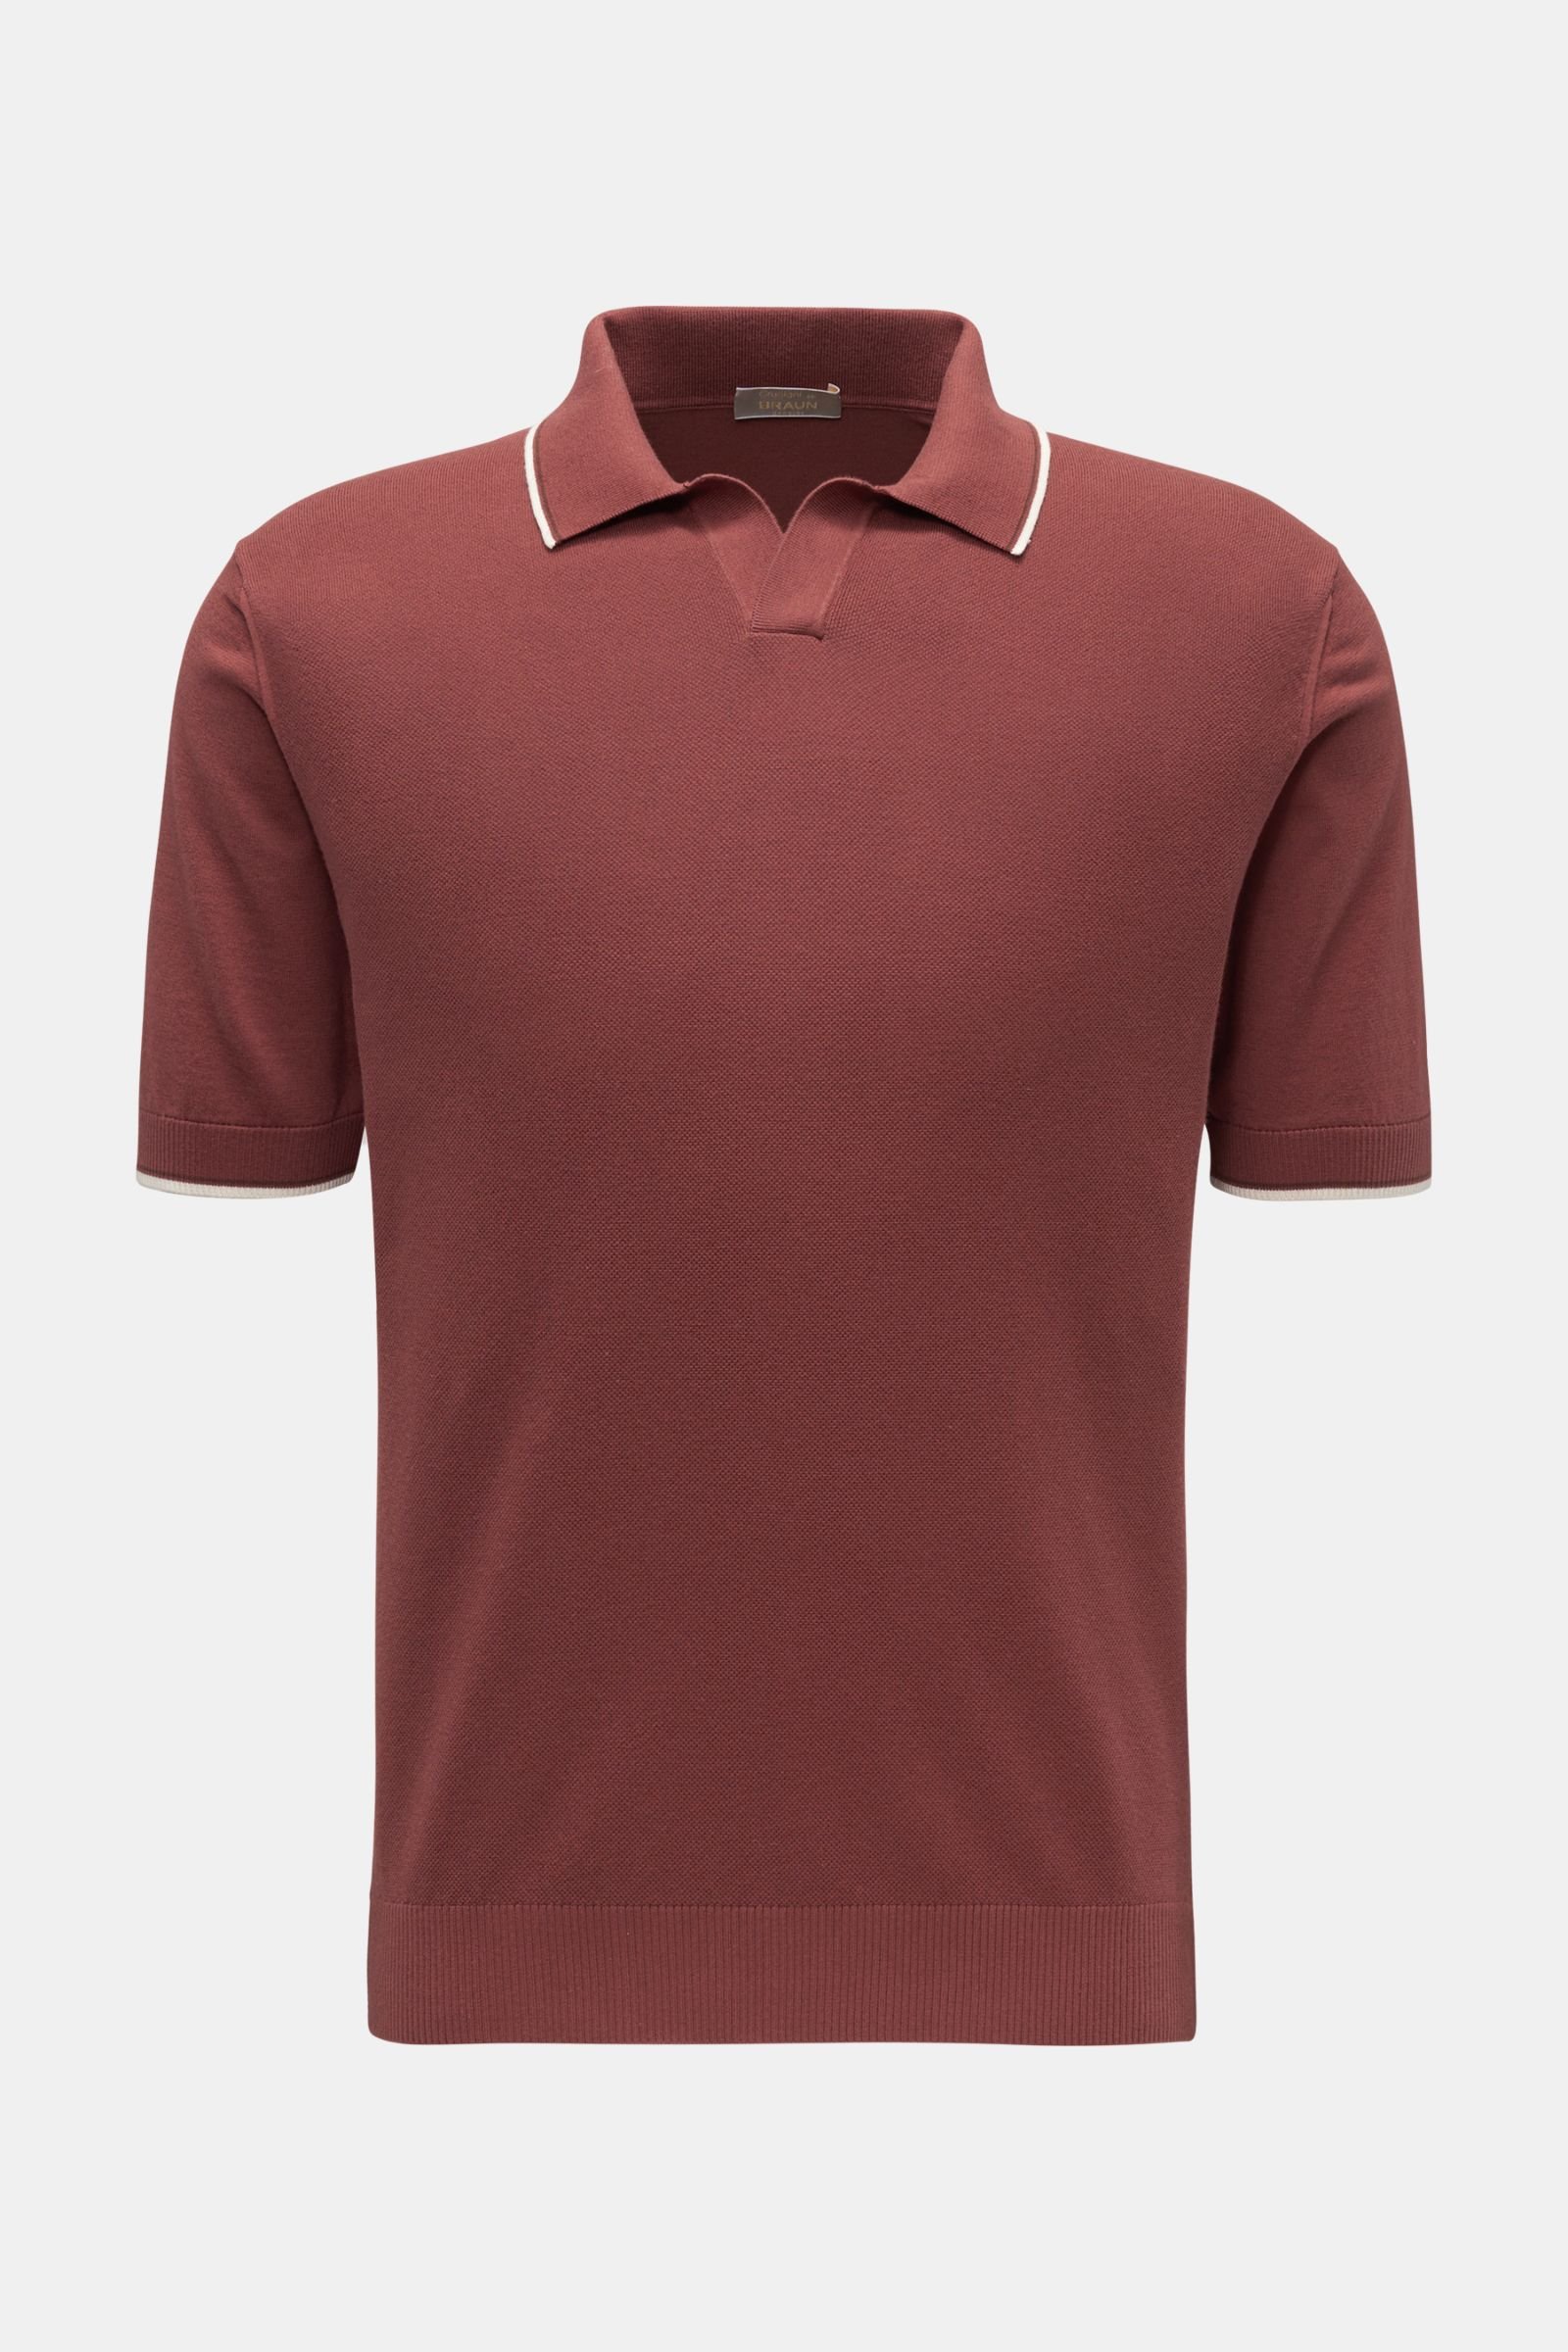 Short sleeve knit polo rust brown